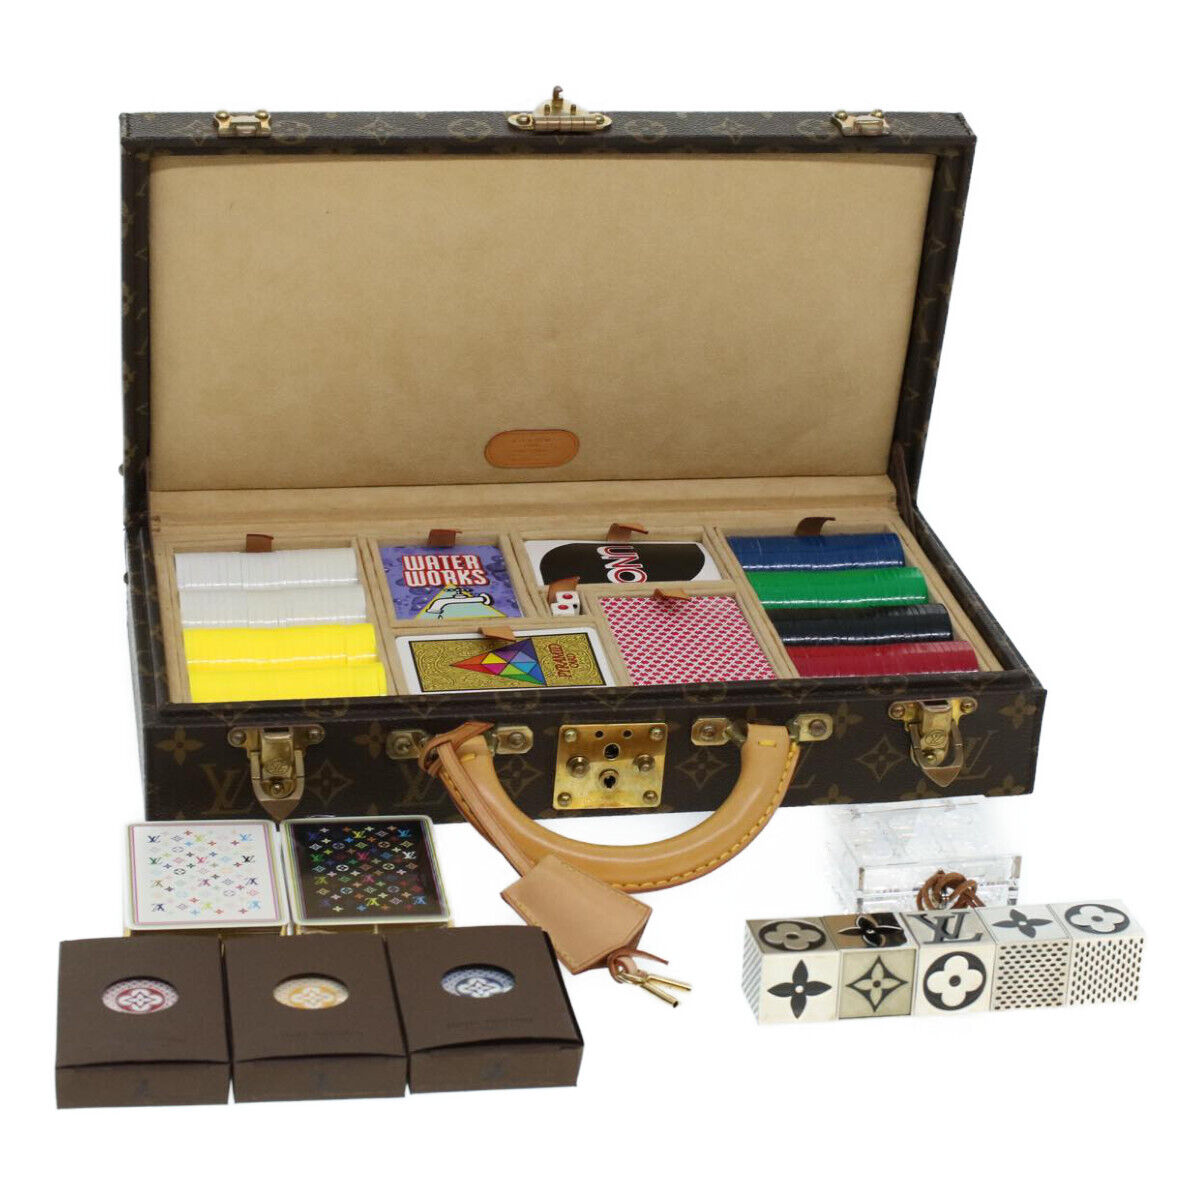 LOUIS VUITTON Monogram Casino Case Playing Cards Cube Game Dice SPO Auth 41140A